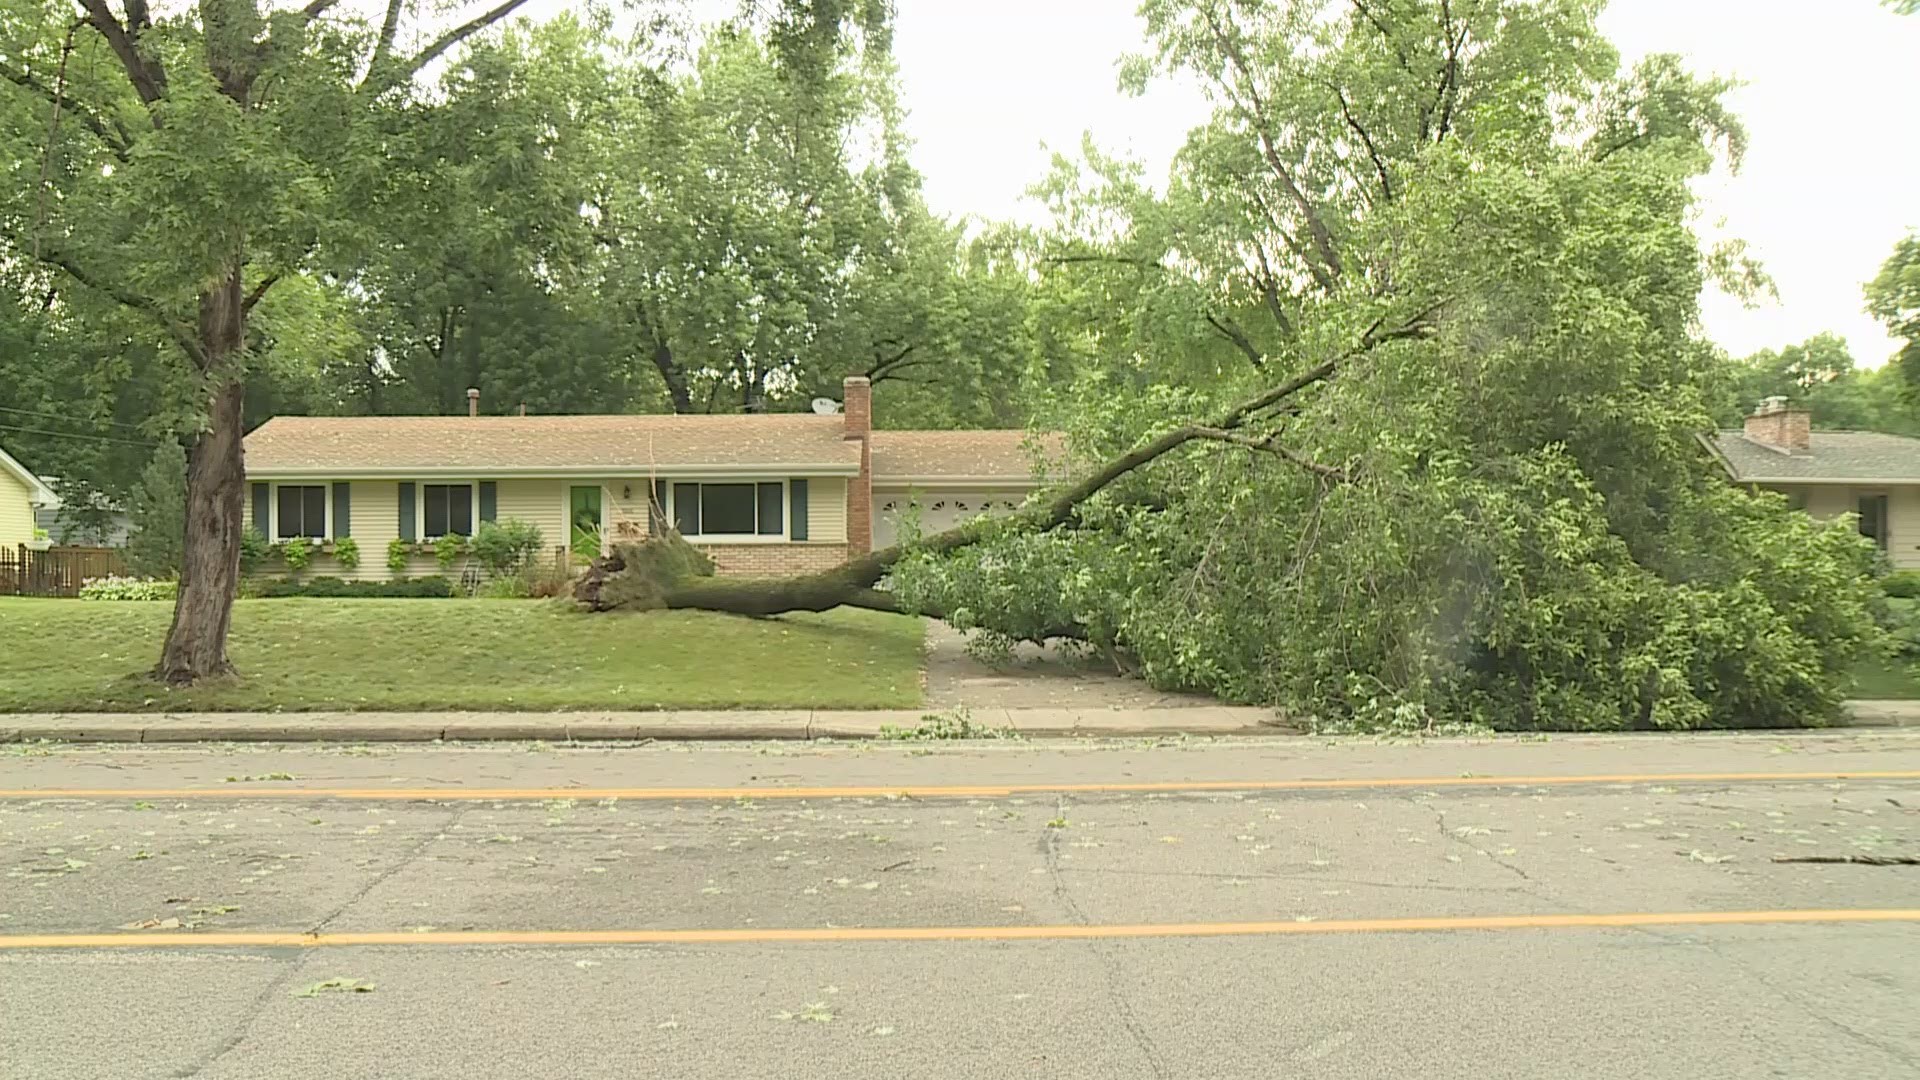 The city of Bloomington is cleaning up after a violent storm that damaged trees, homes and cars, and left thousands without power.